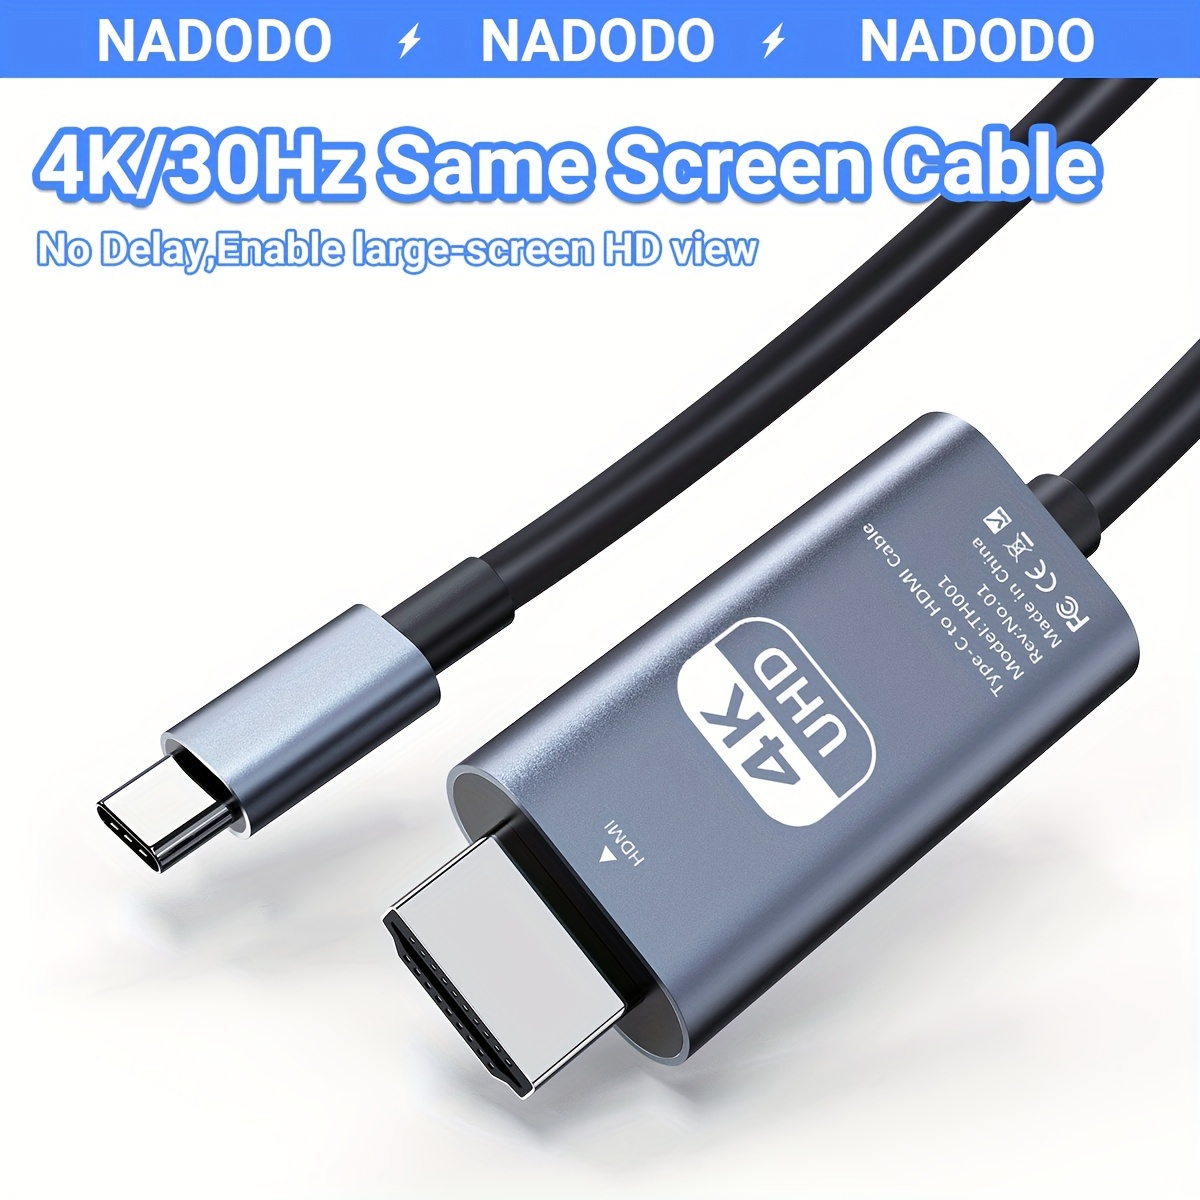 HDMI cable Side screen